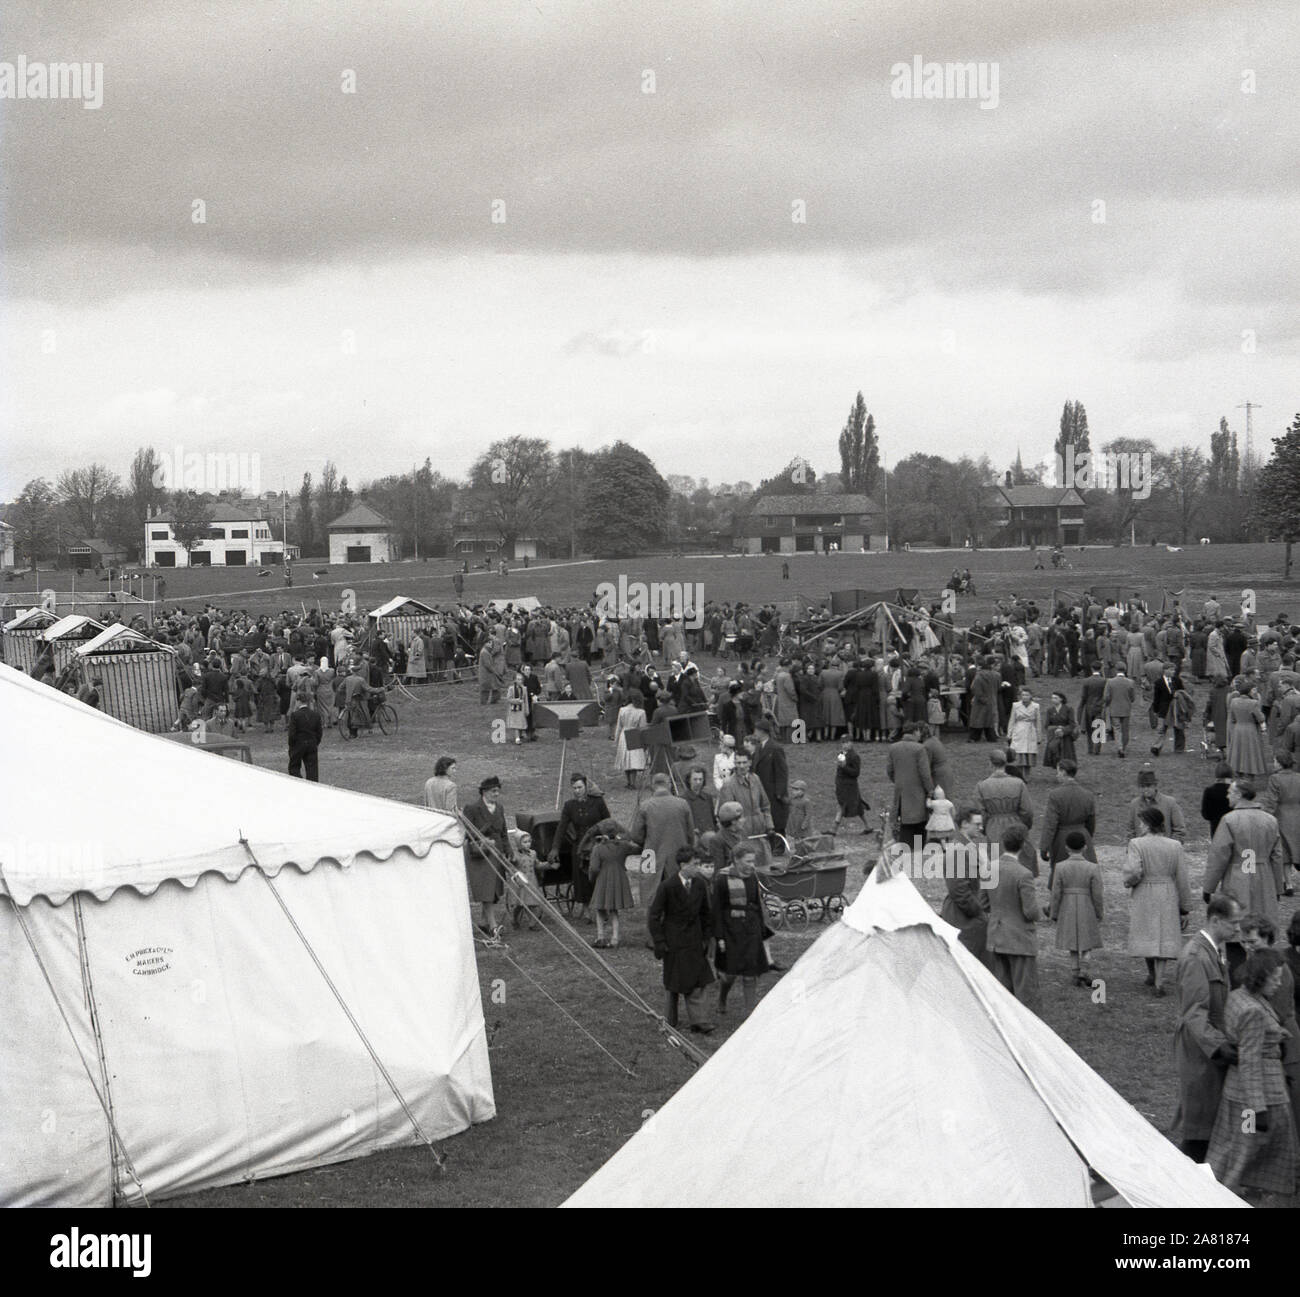 1950s history, visitors to a summer fayre and outdoor tented exhibition in the sports grounds of Cambridge University, England, UK. Stock Photo